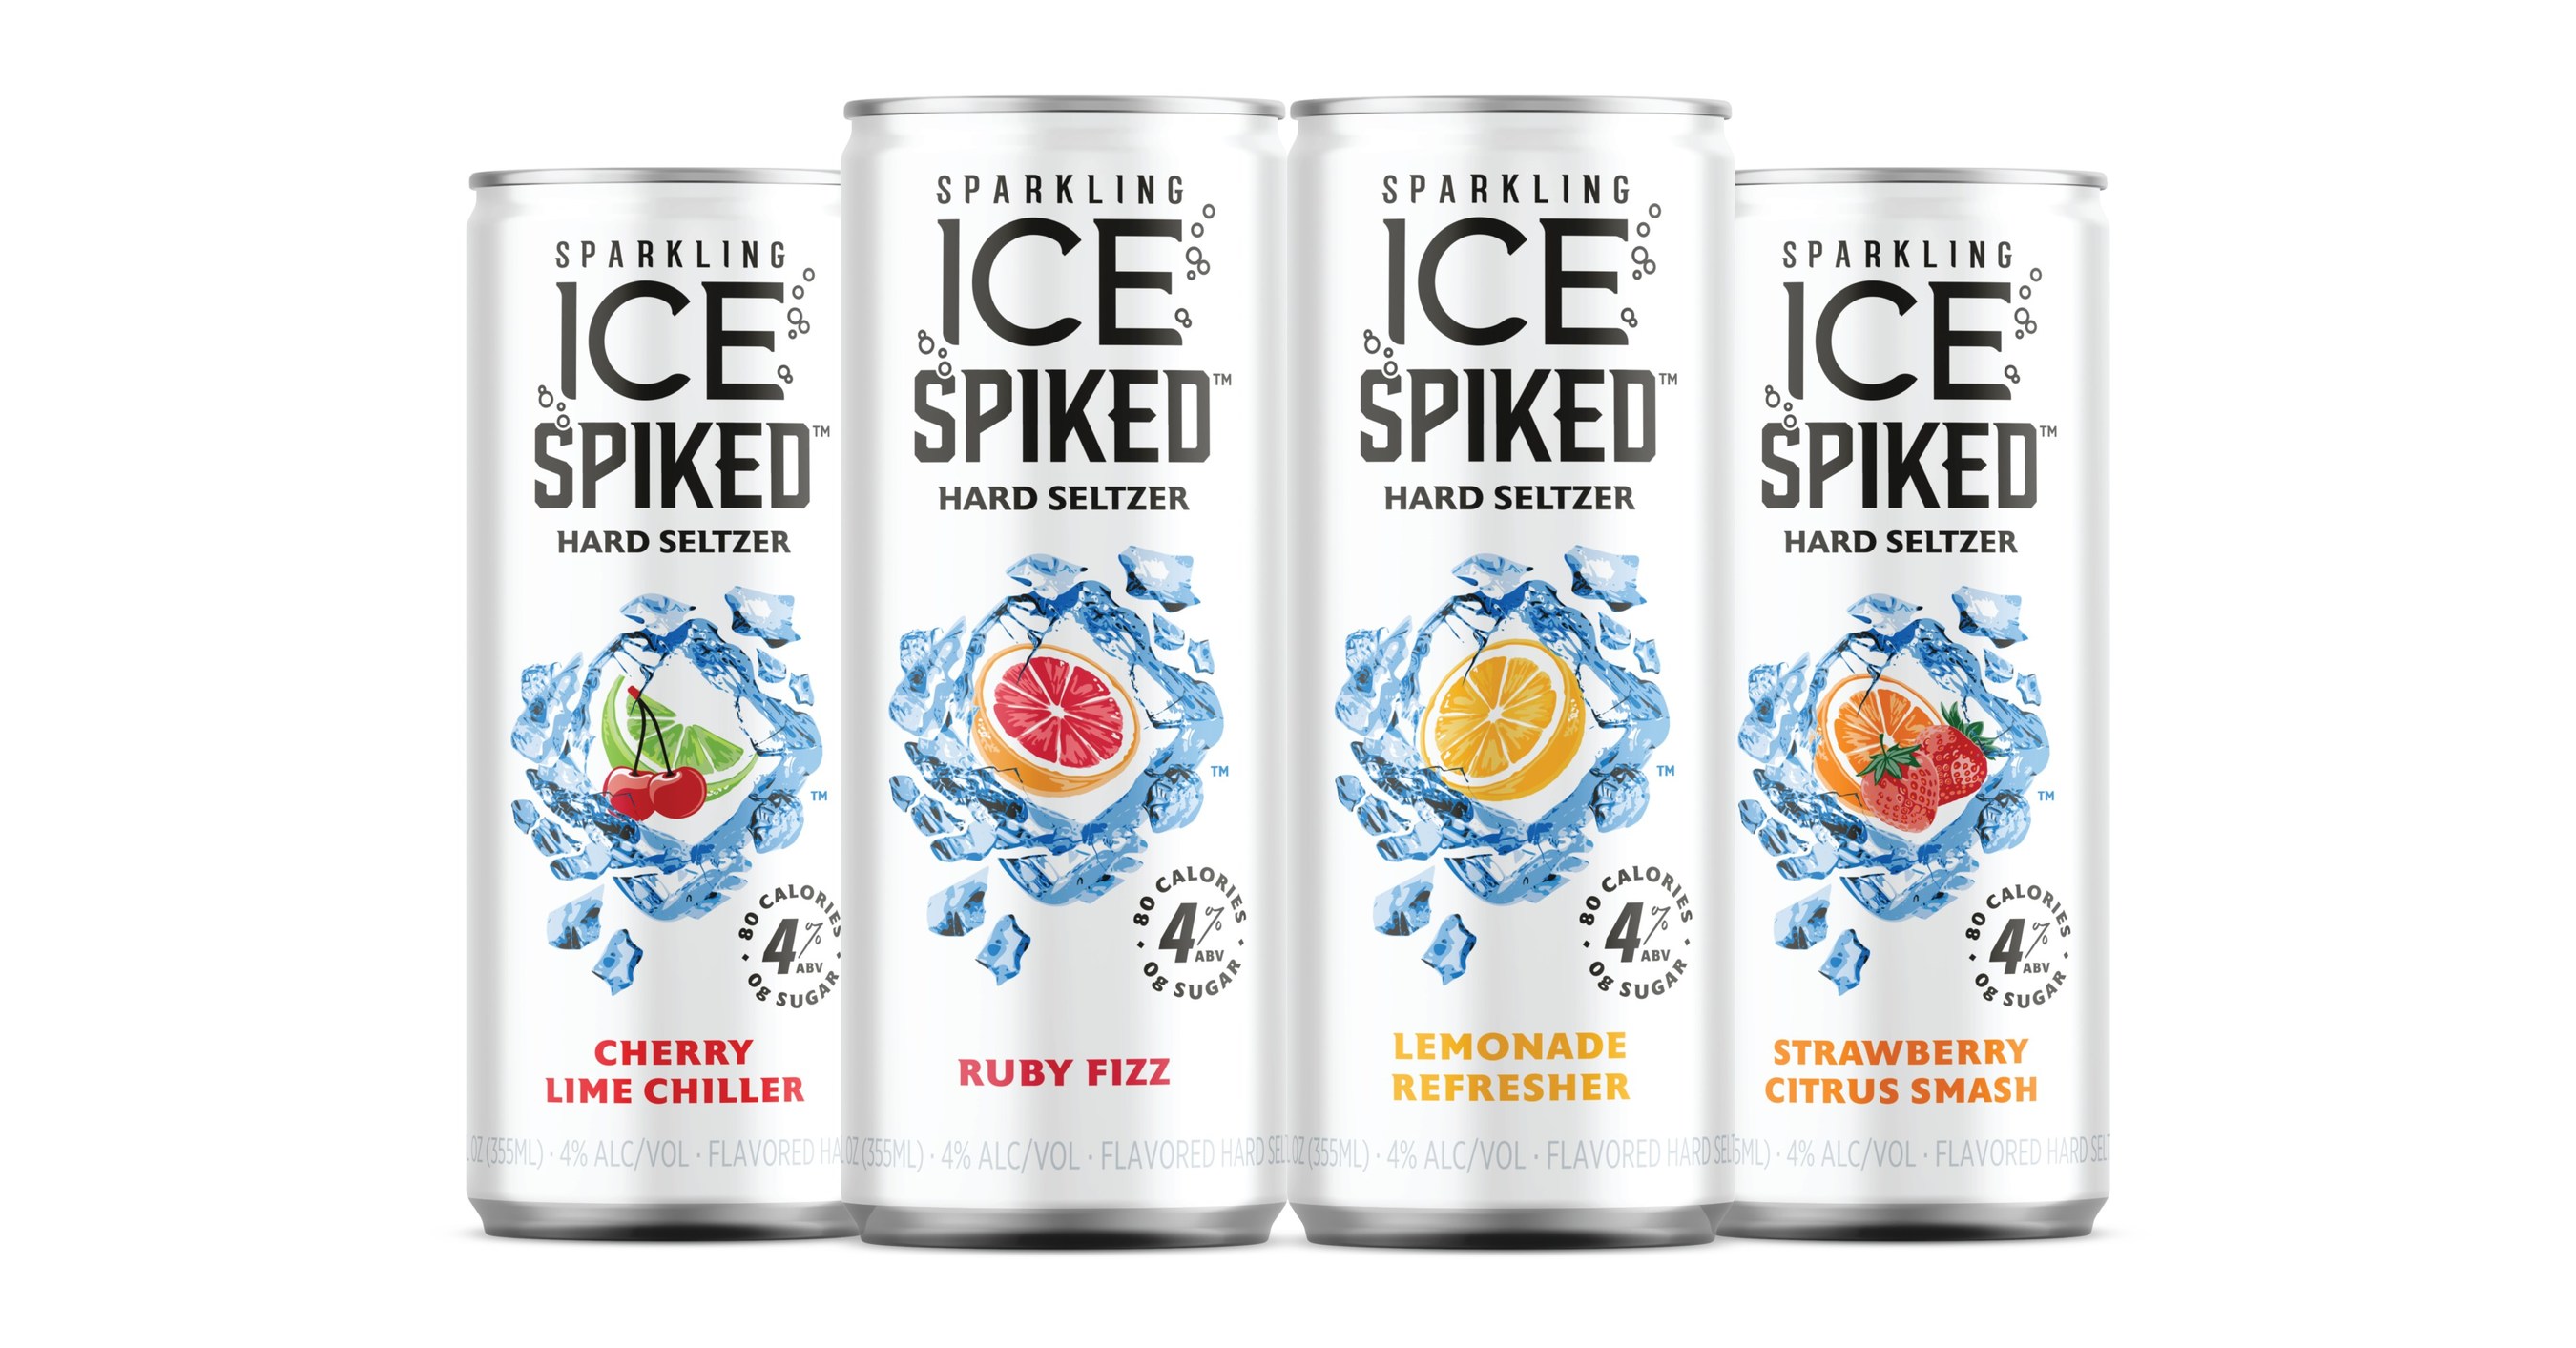 Sparkling Ice Spiked Makes Waves In The Beverage World With New Hard Seltzer